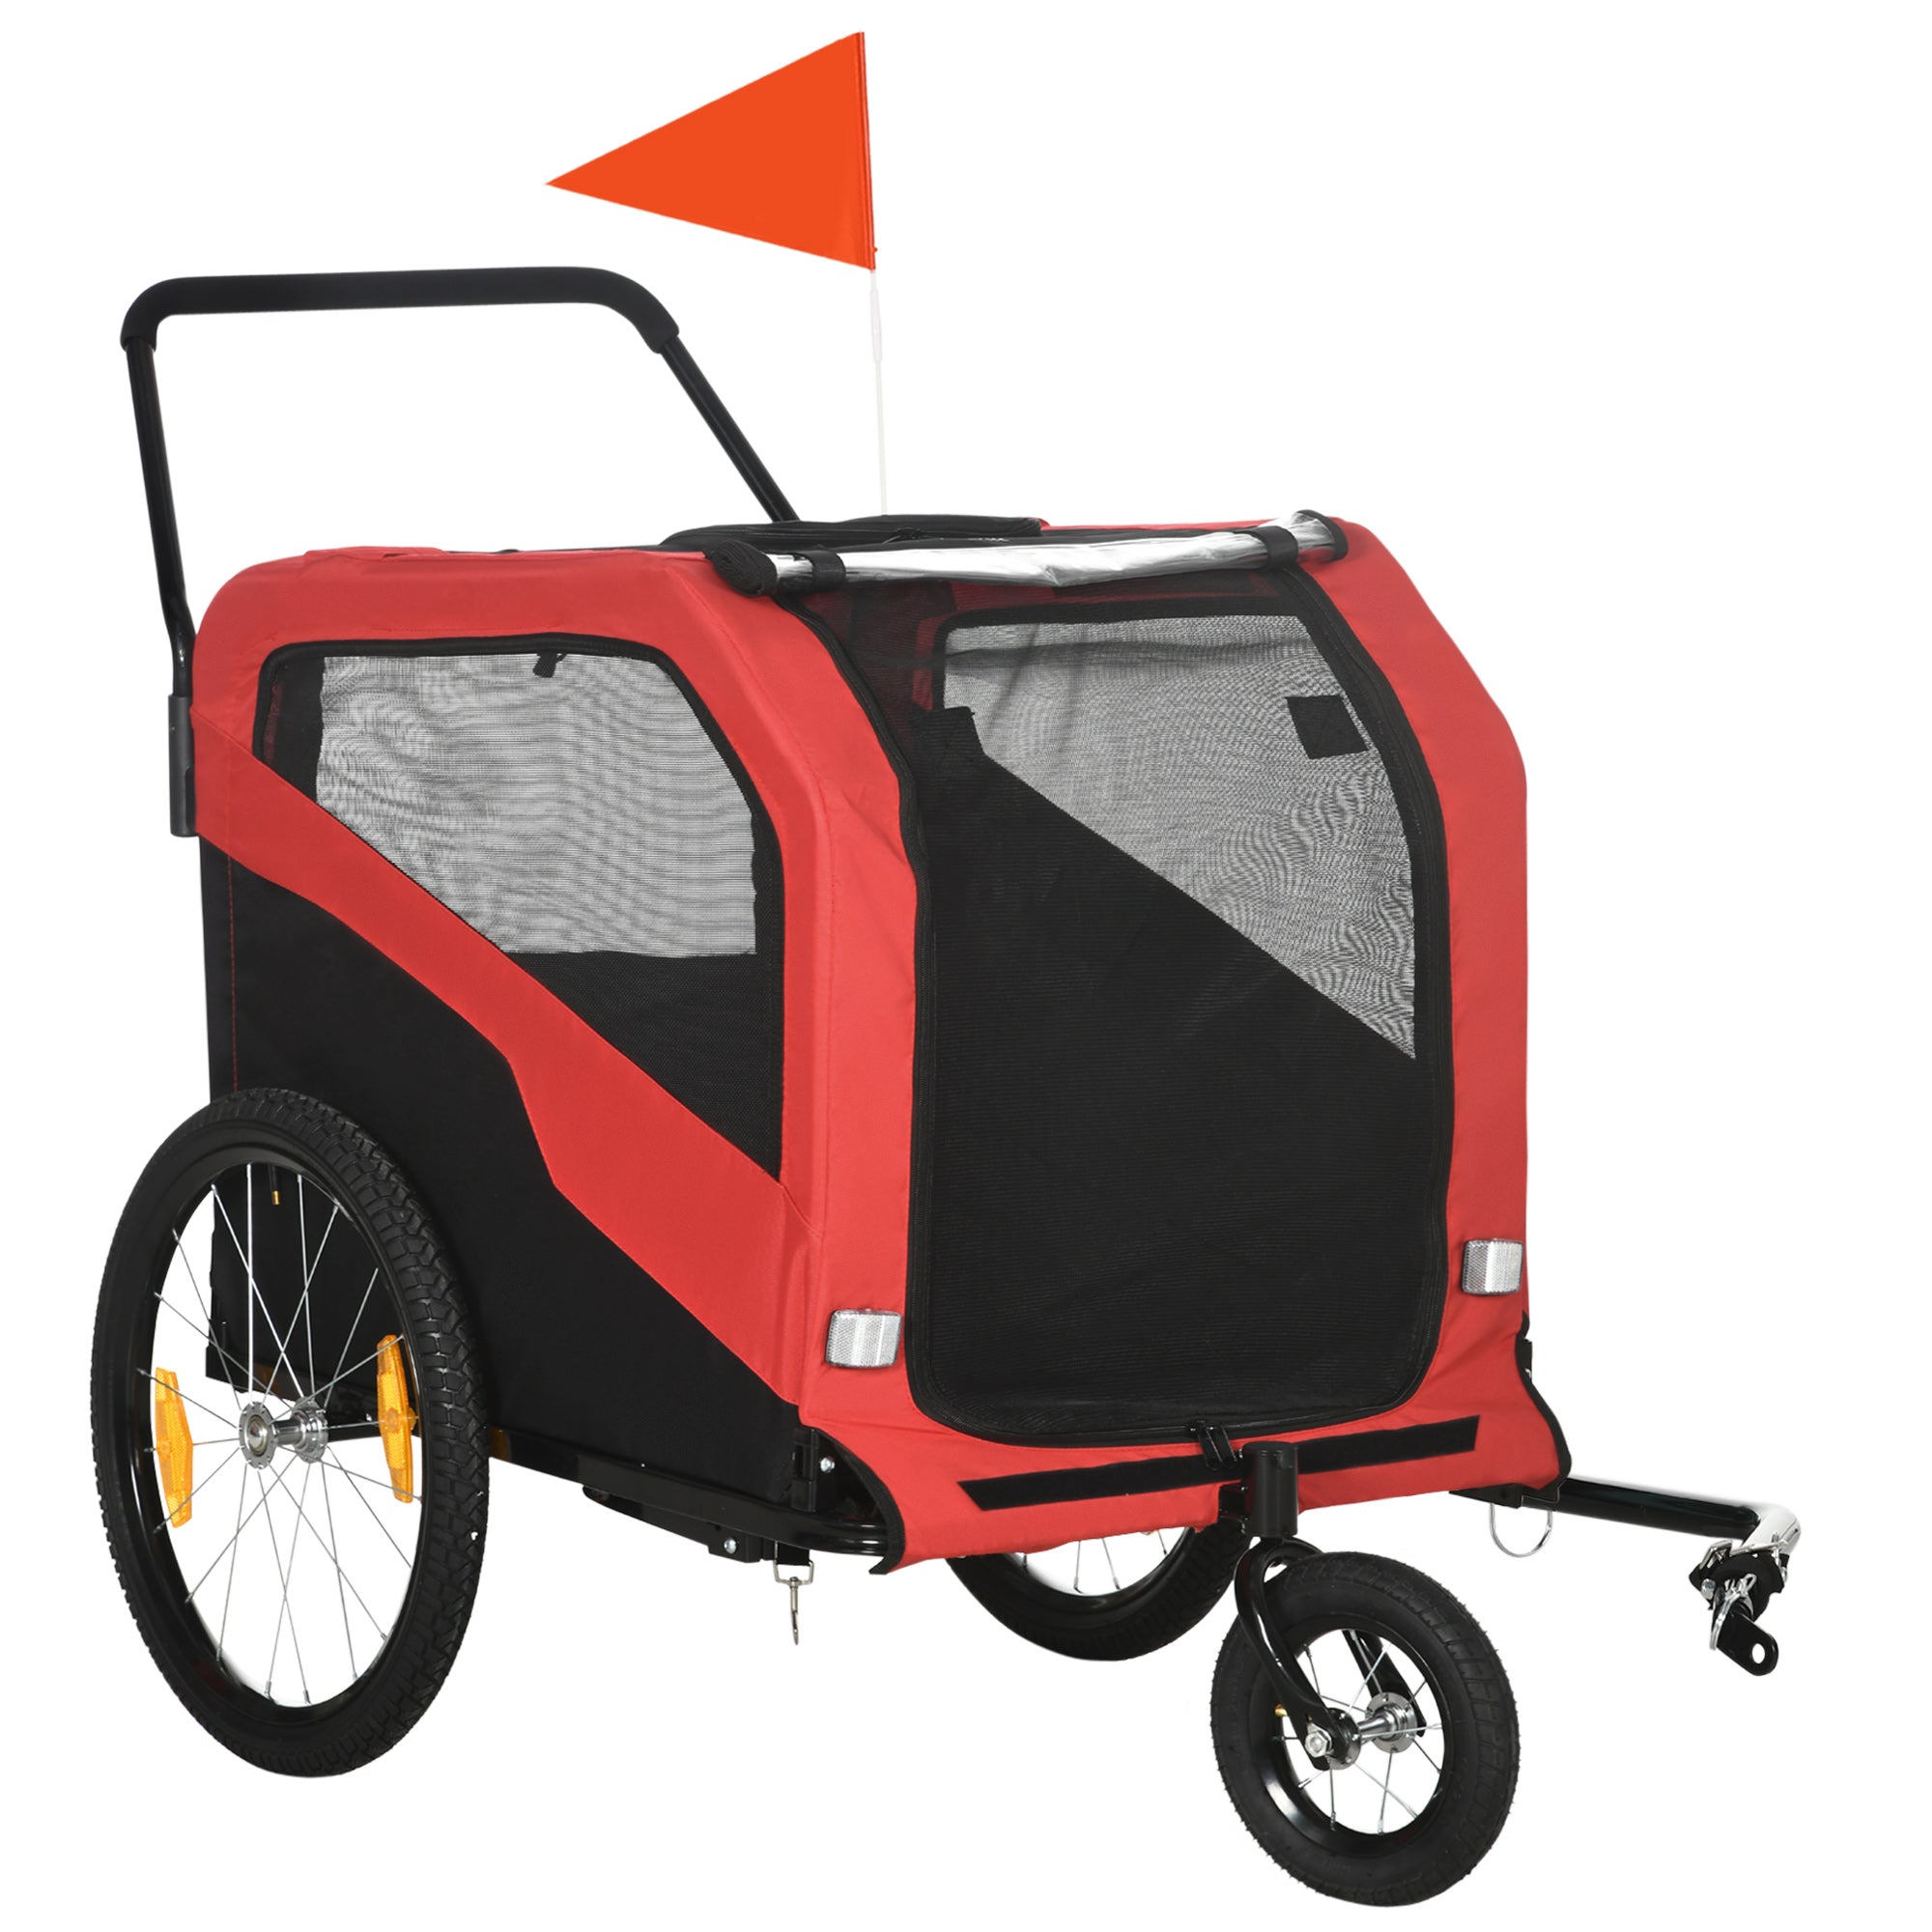 2 in 1 Dog Bike Trailer for Large Dogs with Hitch, Quick-release 20" Wheels, PawHut, Red